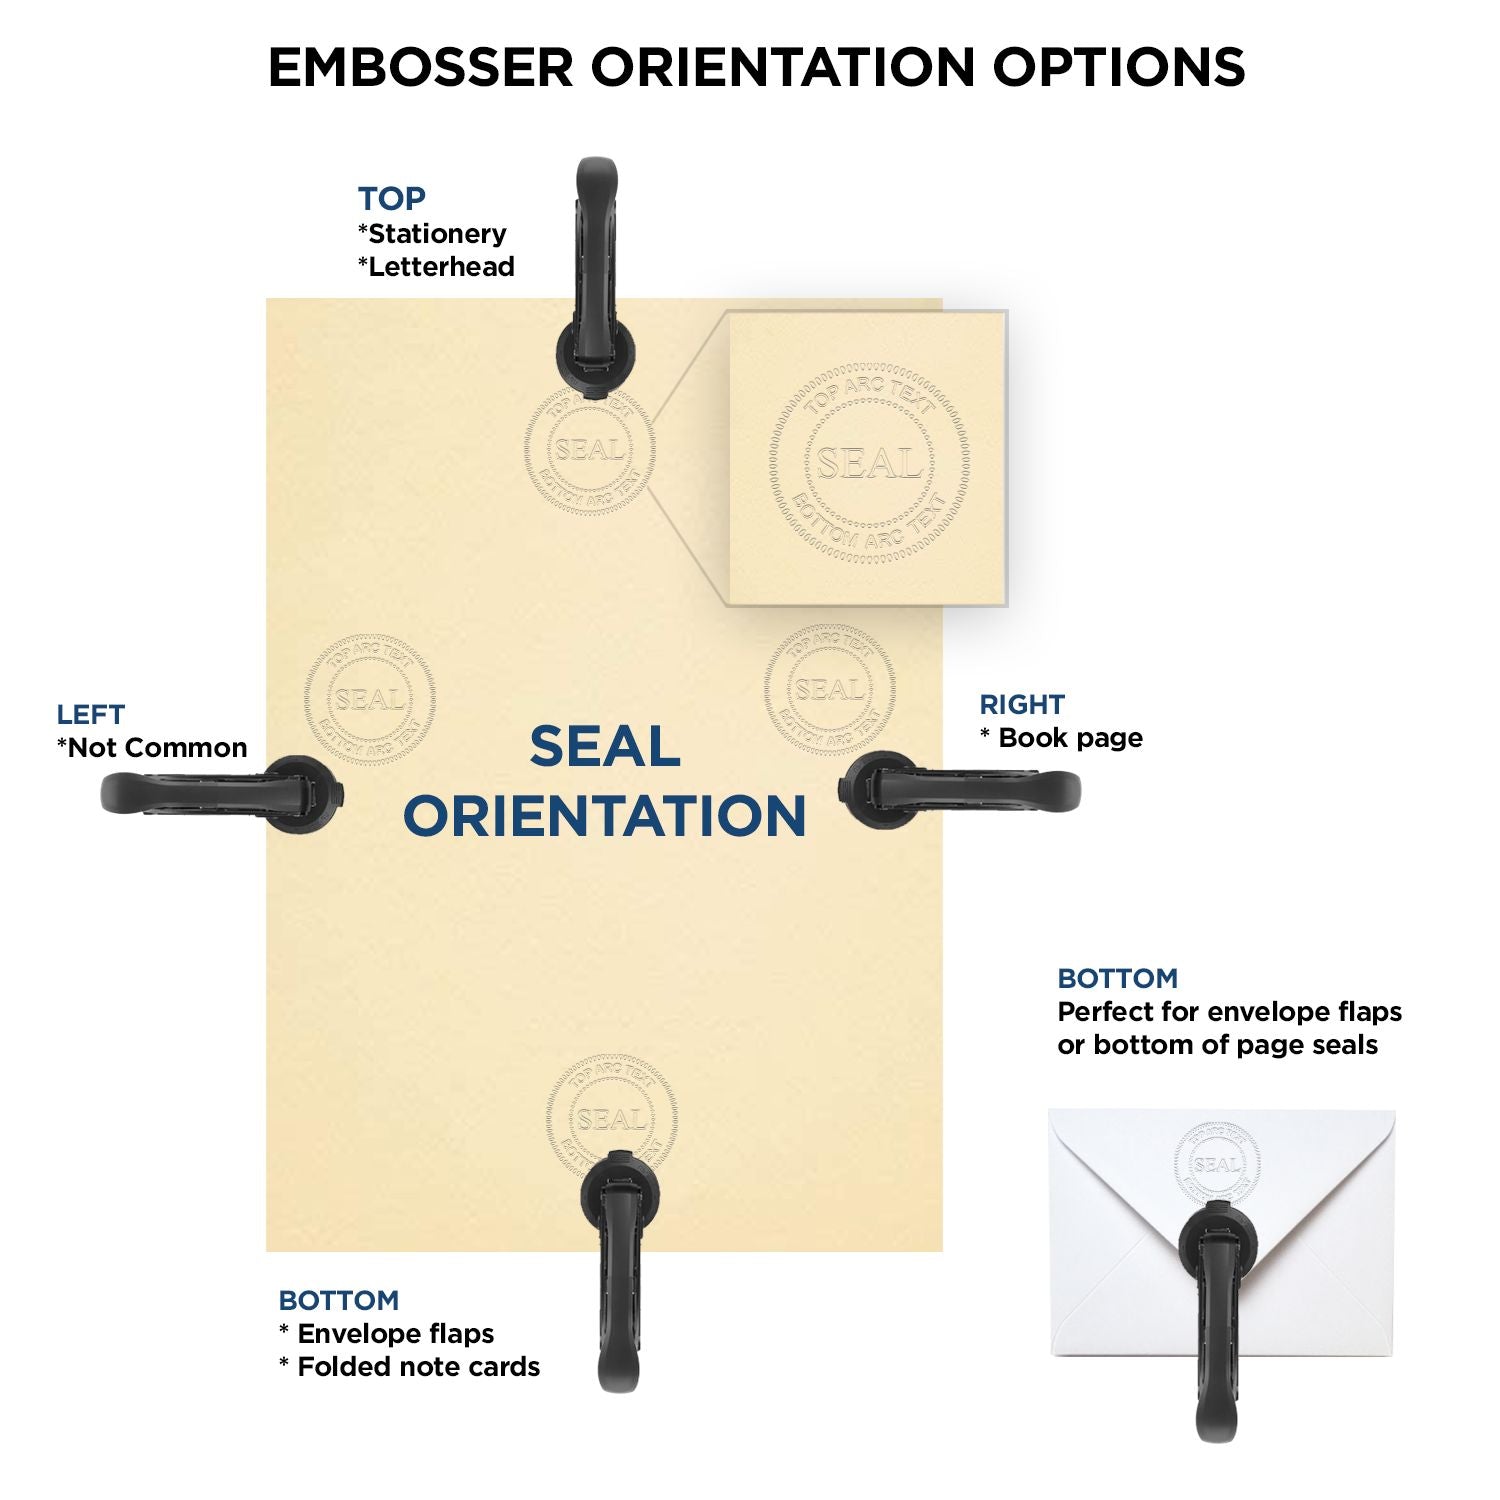 An infographic for the Handheld North Carolina Architect Seal Embosser showing embosser orientation, this is showing examples of a top, bottom, right and left insert.